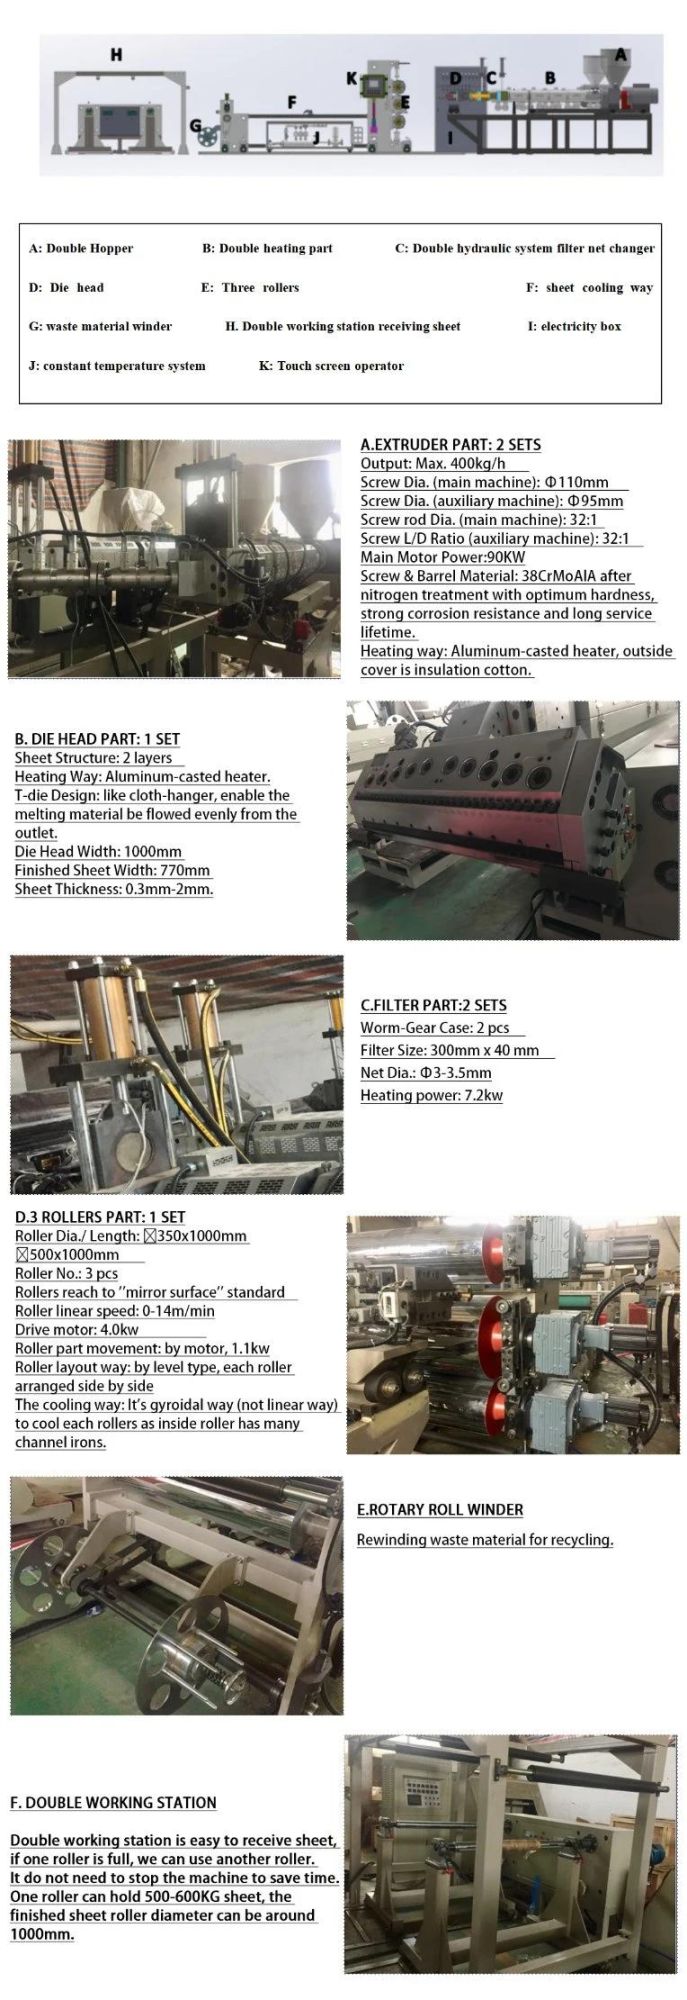 Hot Selling Sheet Die Cut and Gracing Machine/Board Making Machine with High Capacity Conical